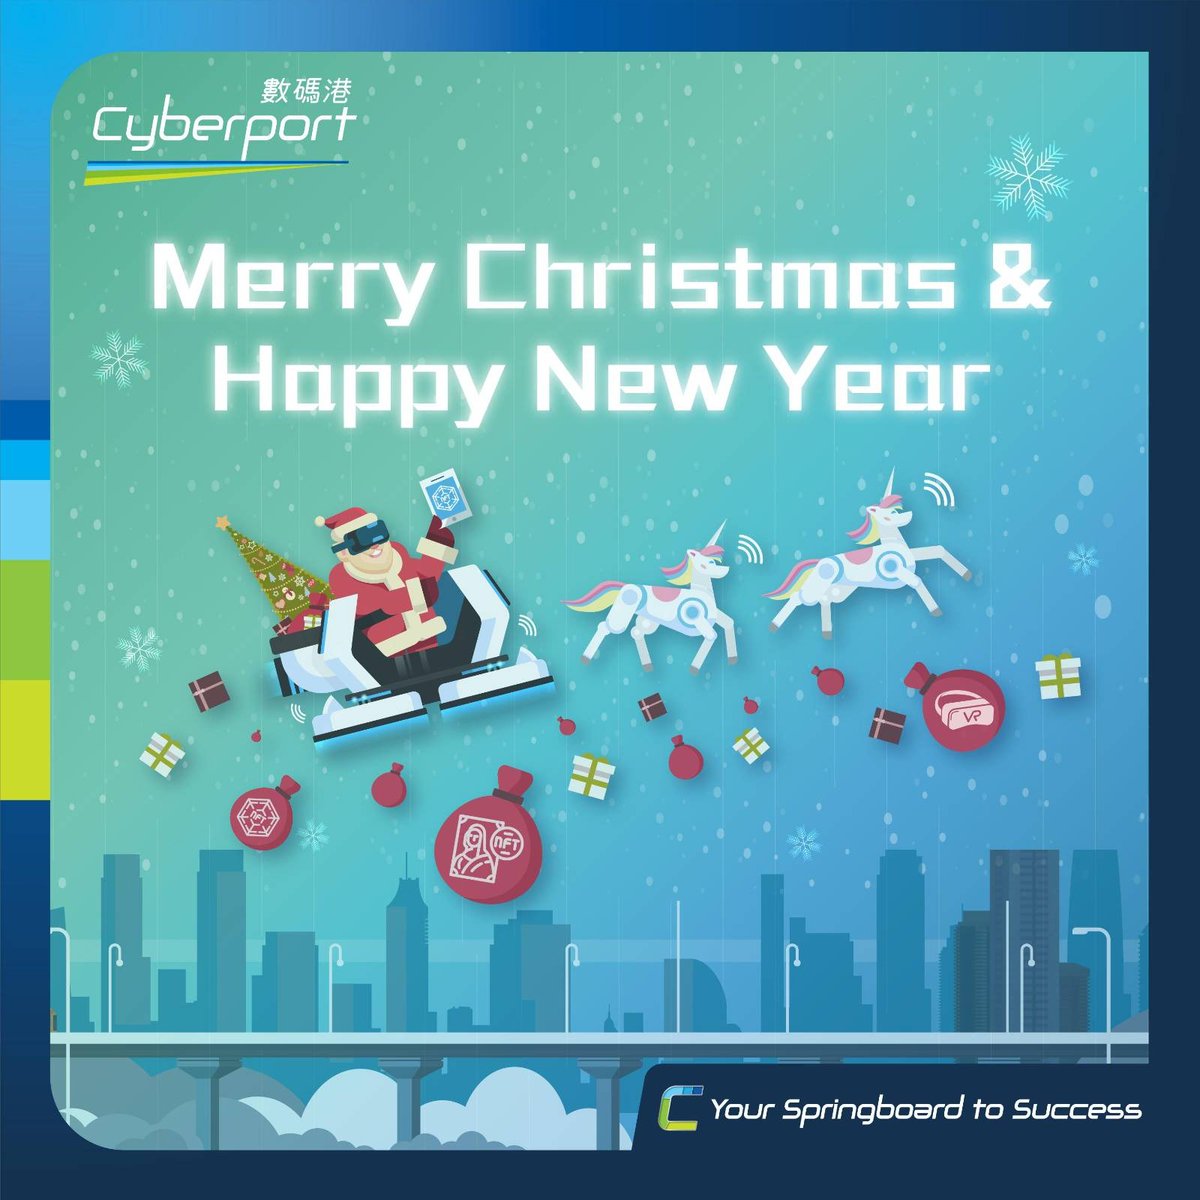 Here comes one of the Merriest times of the year! May the blessings and happiness of the #Christmas season be yours! #Cyberport wishes everyone a Happy New Year! Let's explore more possibilities in 2022! Cheers! #Cyberport #MerryChristmas #HappyNewYear #2022